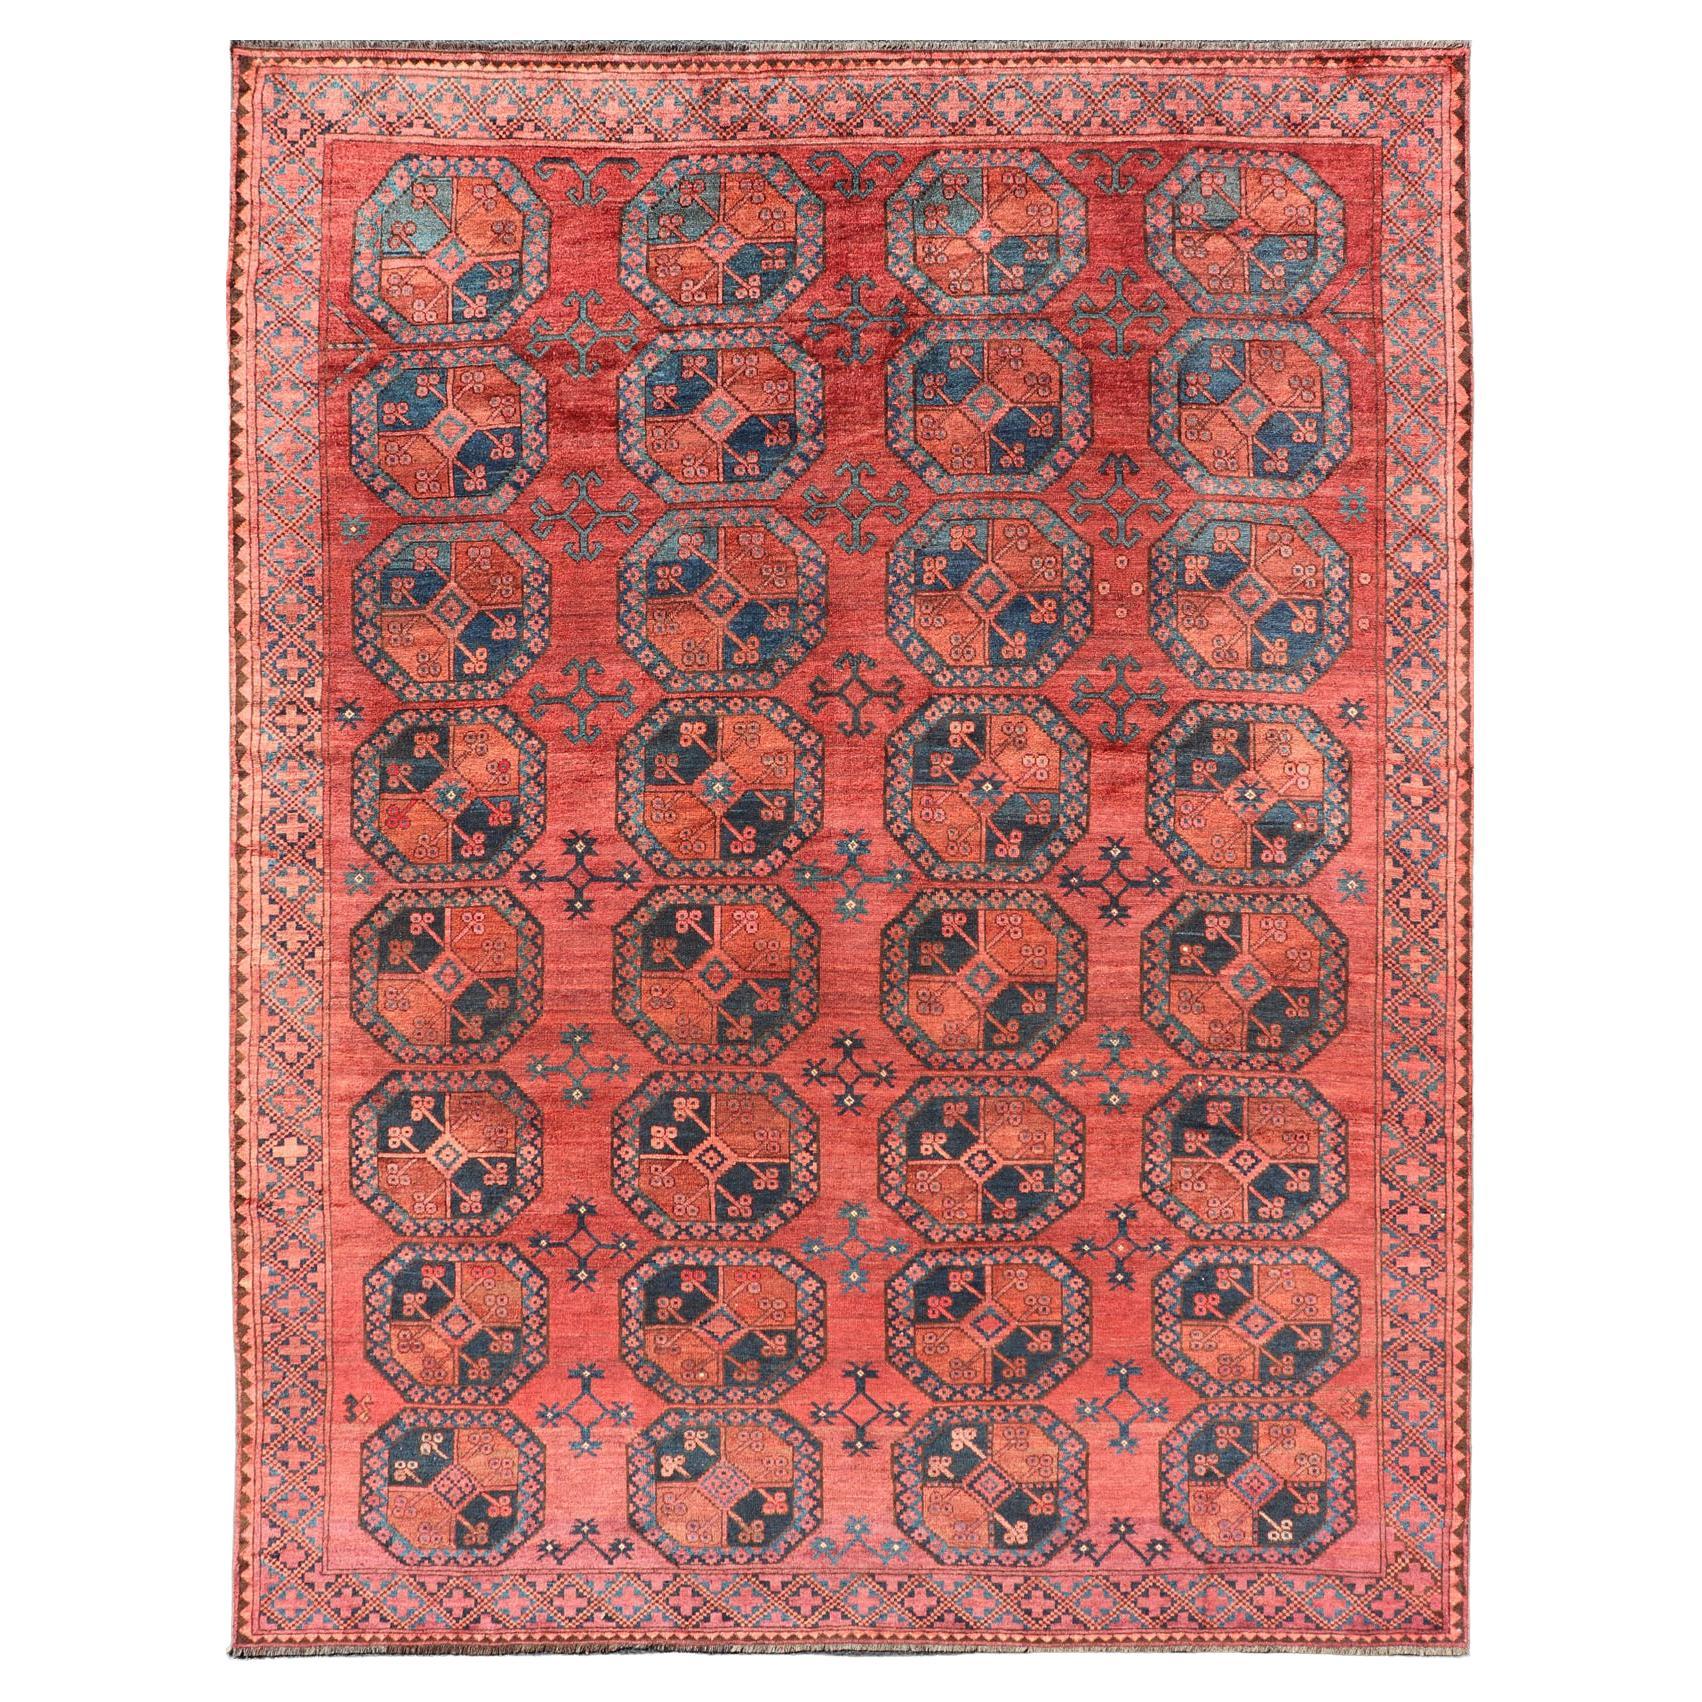 Hand-Knotted Turkomen Ersari Rug in Wool with Gul Design in Red, Orange and Blue